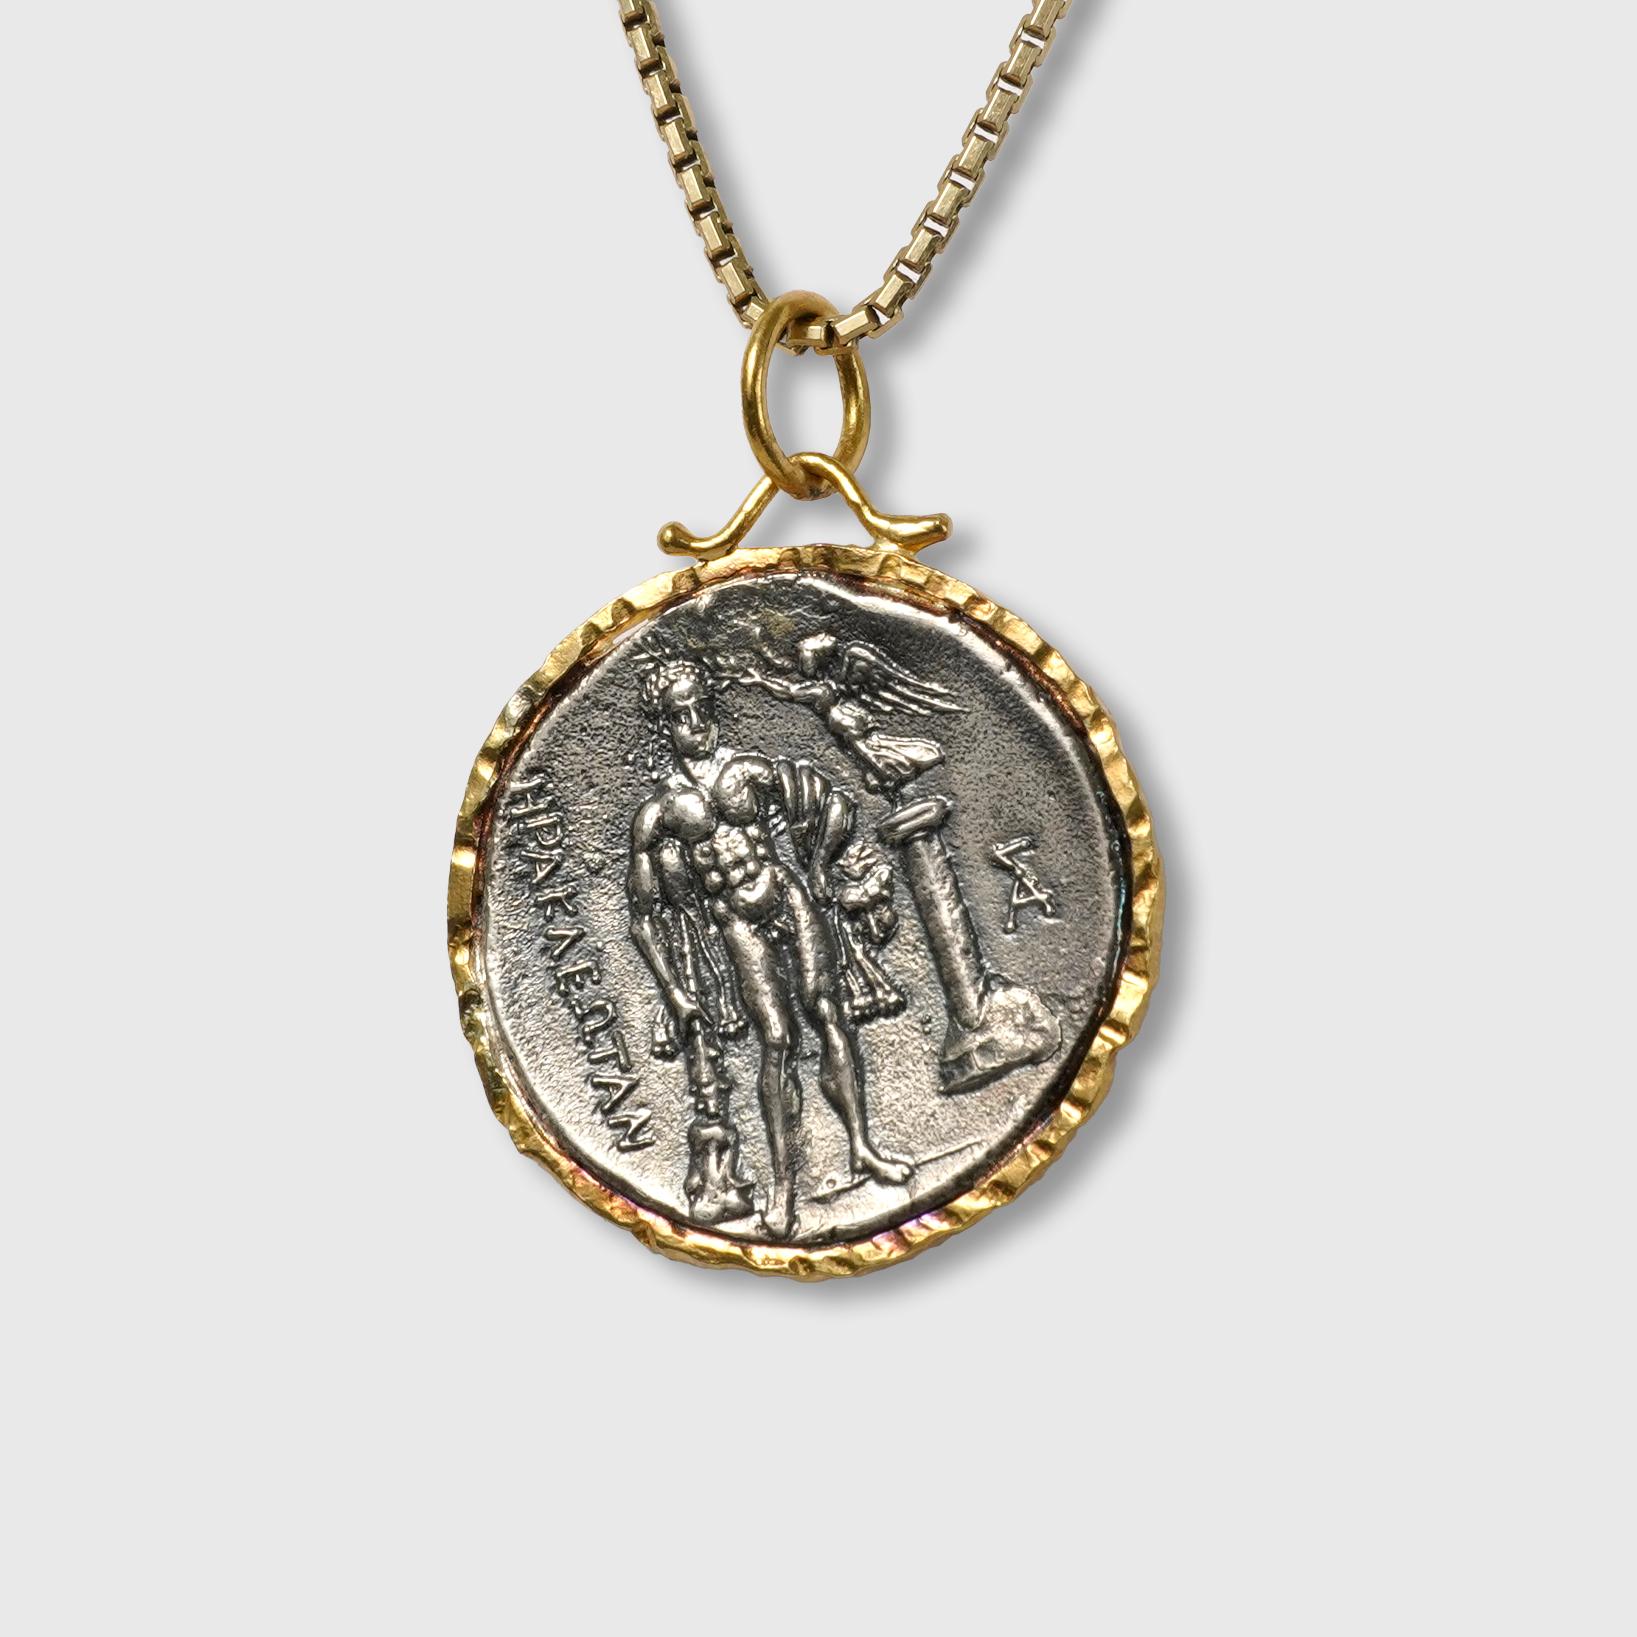 24kt gold and sterling silver pendant of an Ancient Greek Coin (Replica) with Head Wreath & Wheat and 0.07cts Diamonds.  Sterling Silver coin is a replica coin from those in the Turkish Museum. 

Back of coin shows greek man, angel and greek